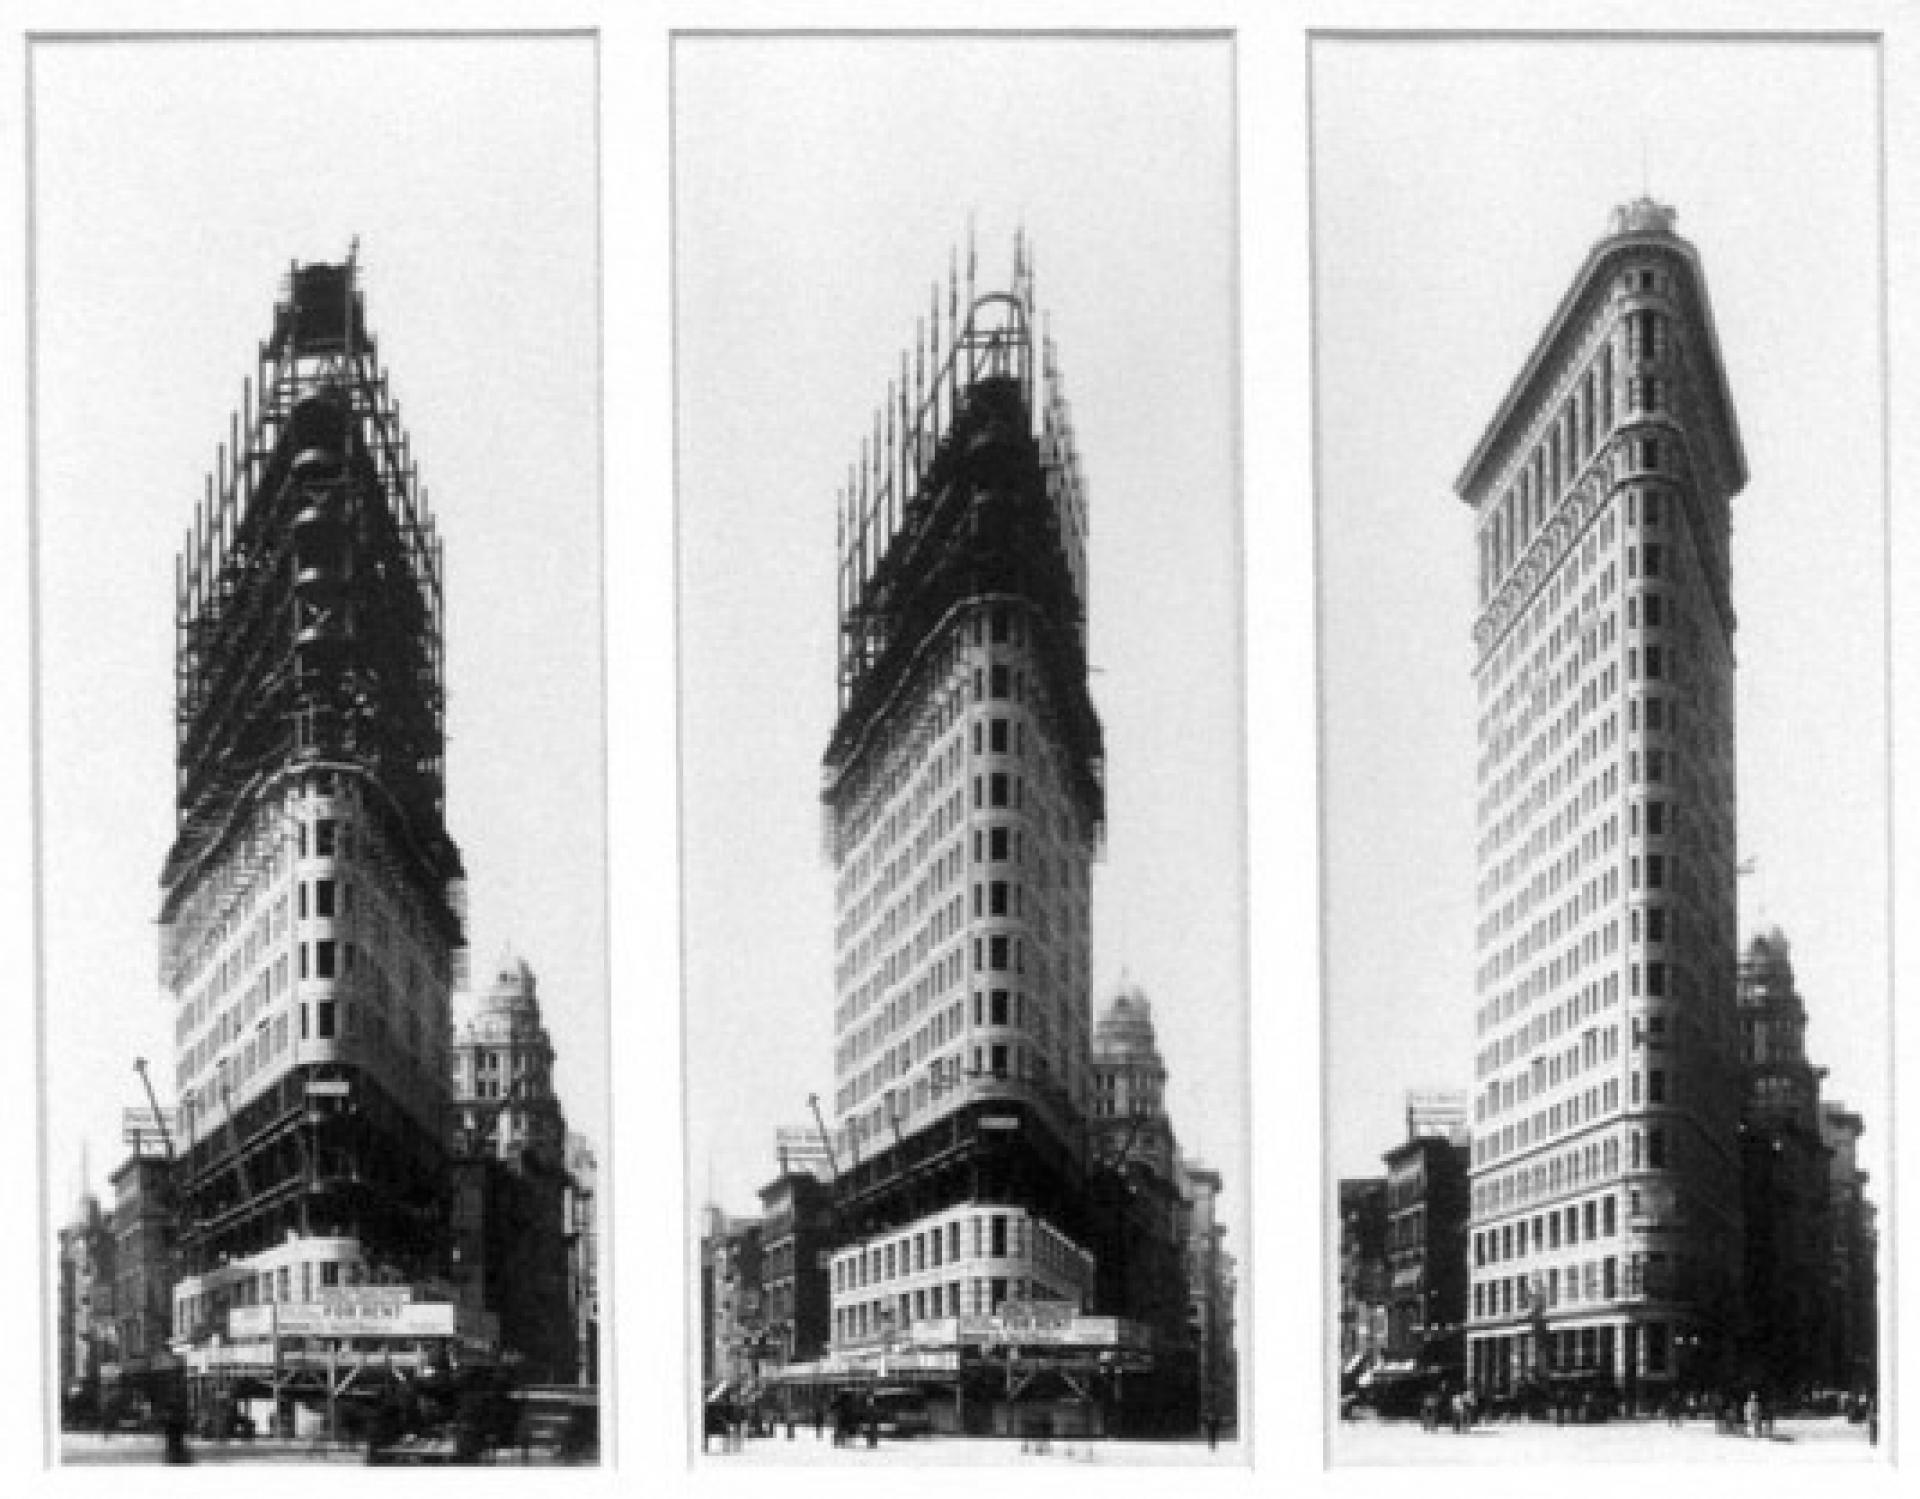 Designed by Daniel Burnham is one of the most recognizable early steel skyscraper constructions in the United States. | Photo via Wikipedia